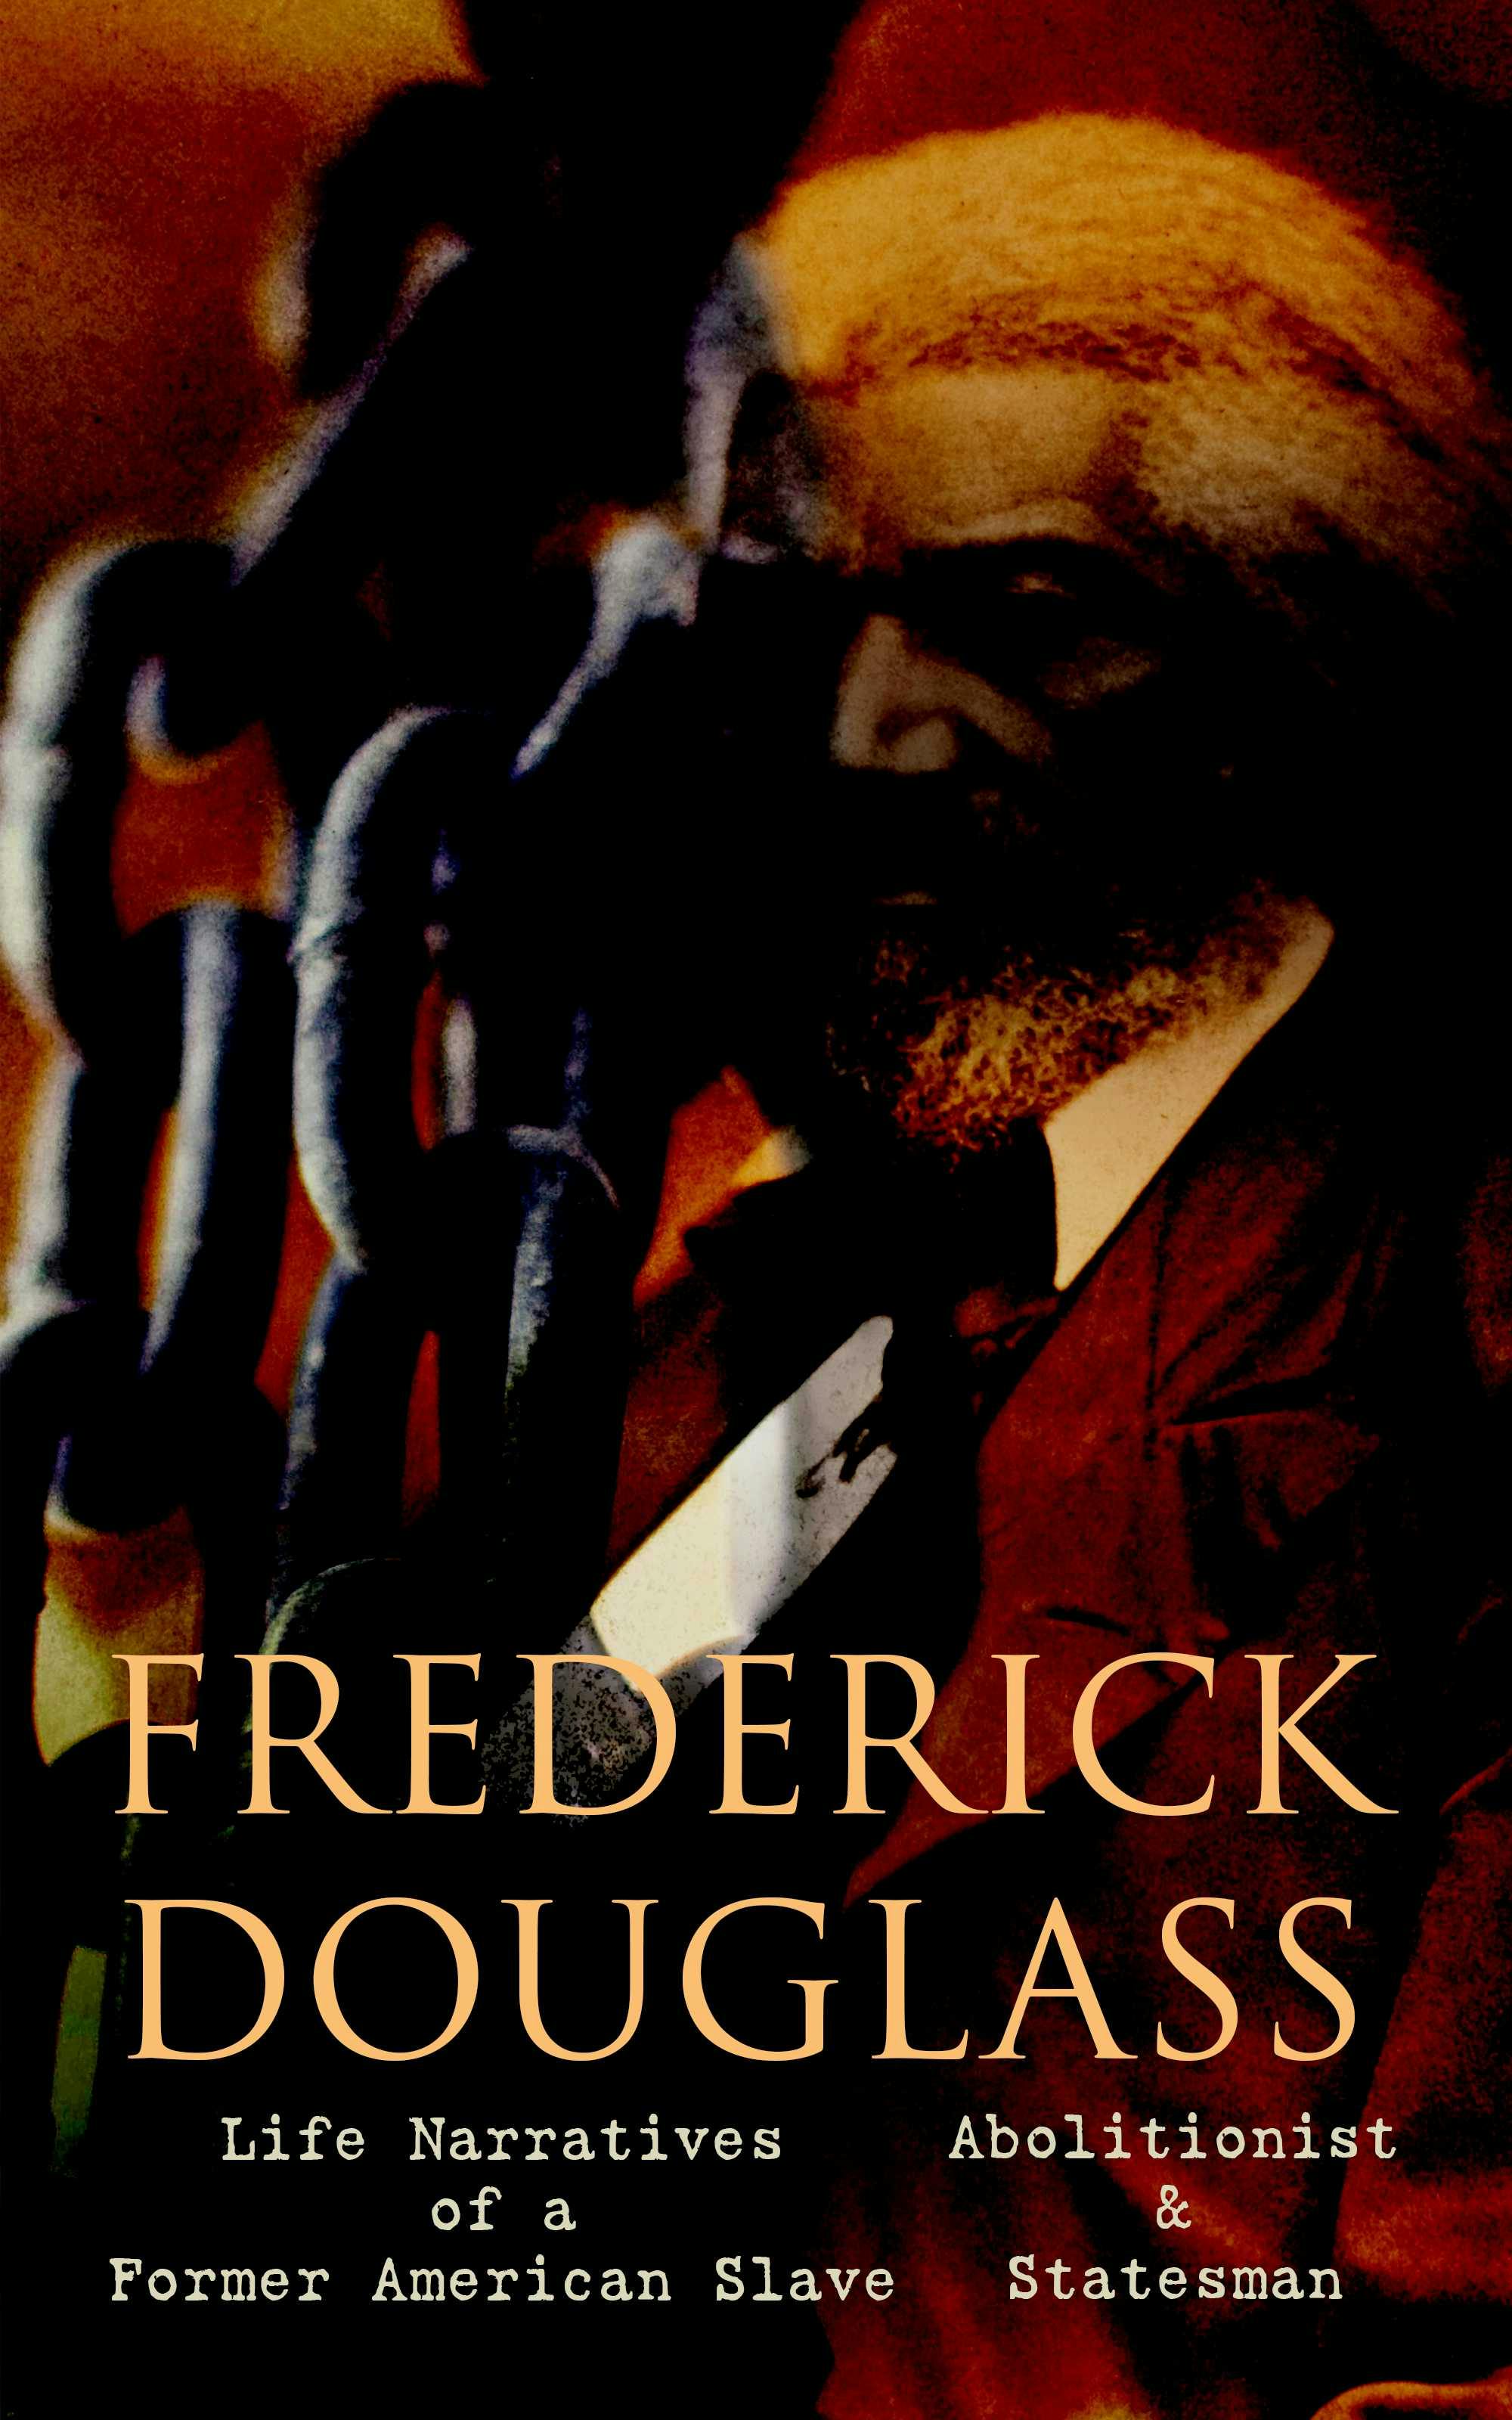 FREDERICK DOUGLASS - Life Narratives of a Former American Slave, Abolitionist & Statesman: Collected Works - Frederick Douglass